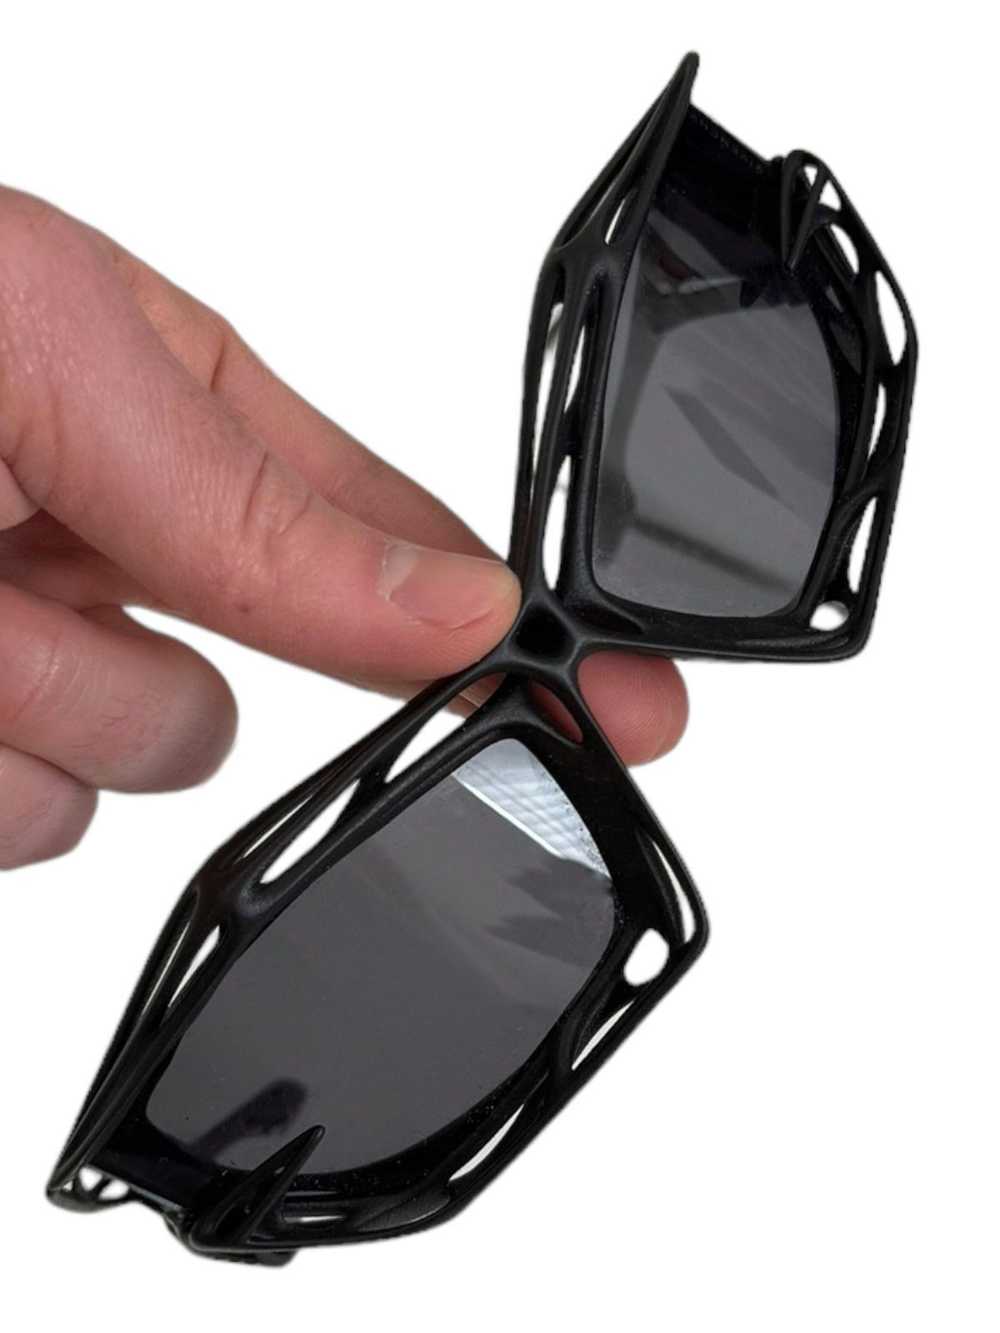 Givenchy 3D Print Cut Cage Sunglasses - image 7